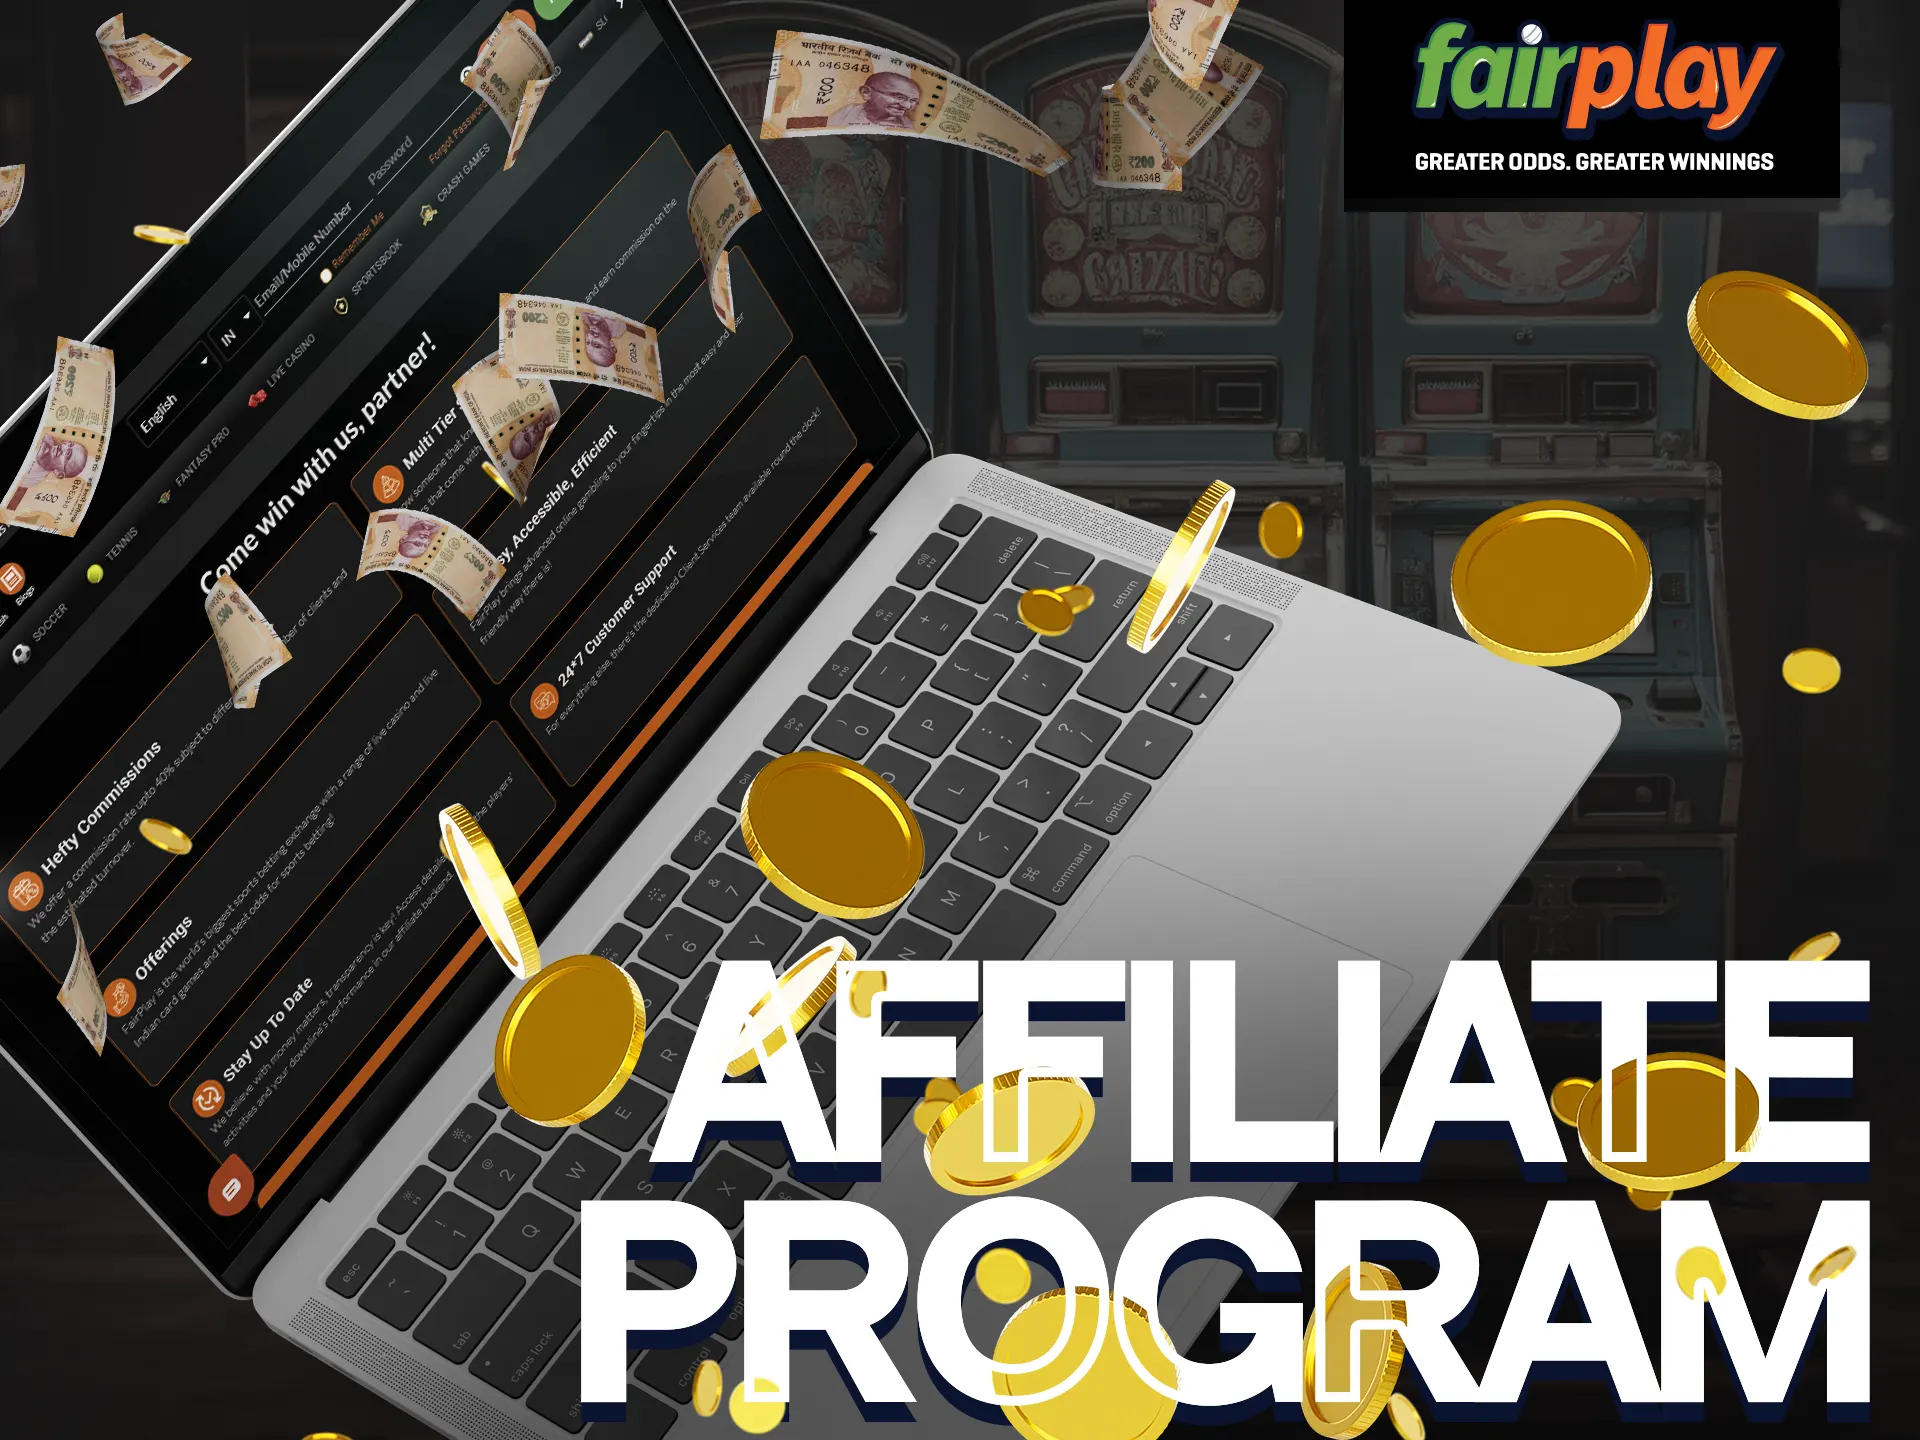 Become a Fairplay Casino affiliate, earn up to 40% commission based on performance.